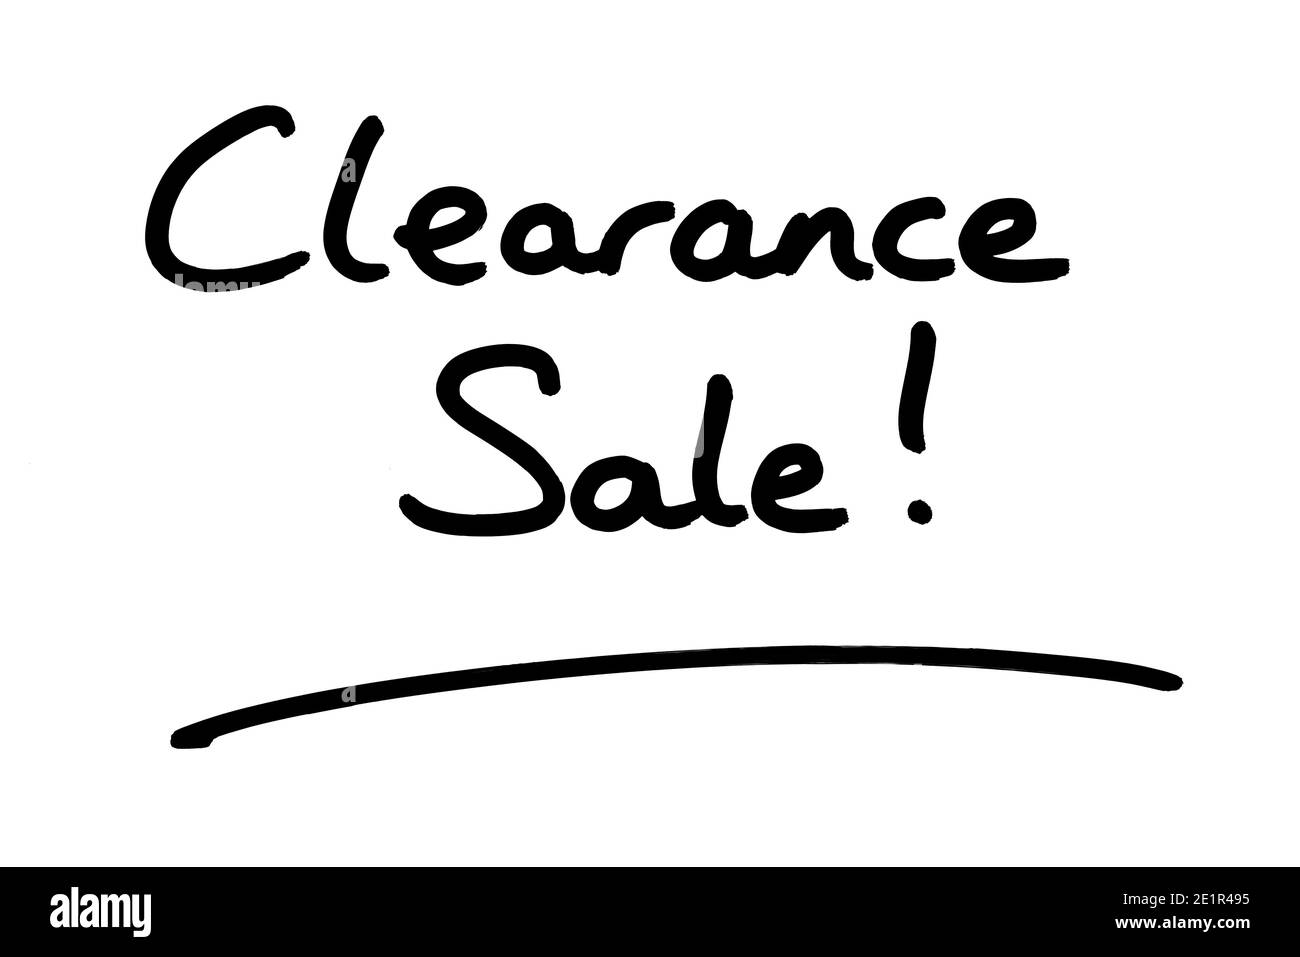 Clearance Sale! handwritten on a white background. Stock Photo